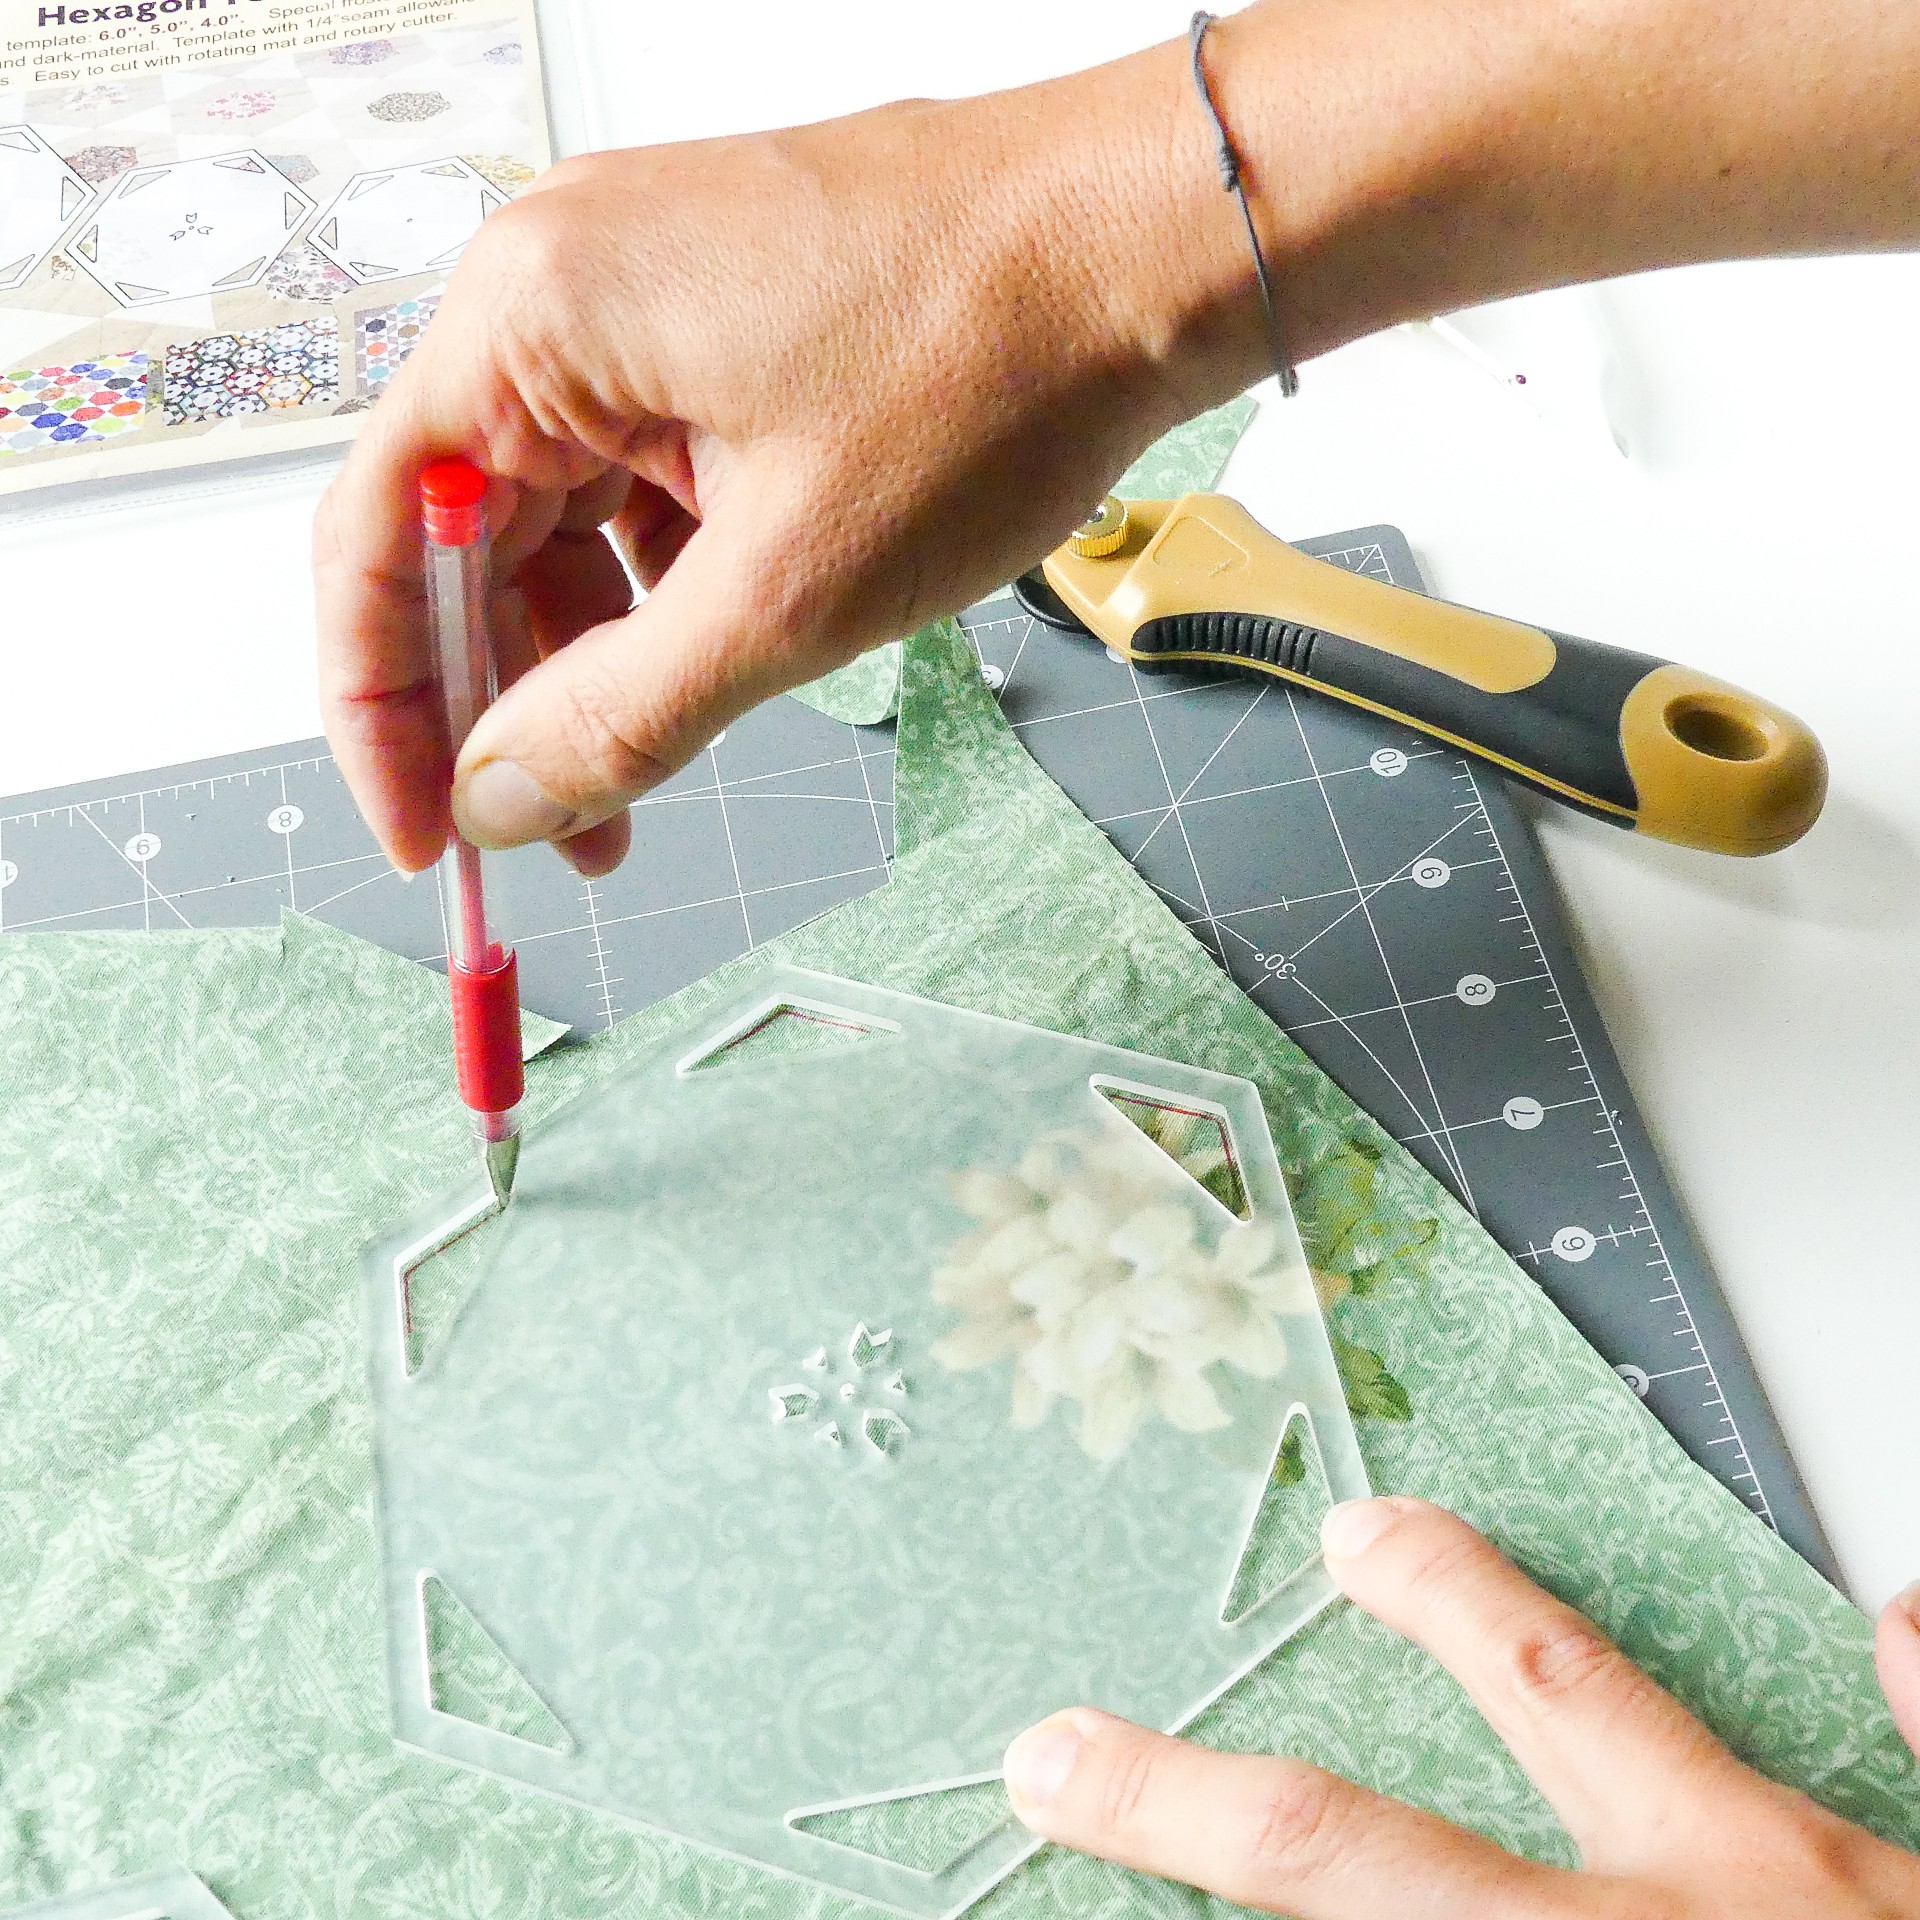 Marking lines in the triangular seam allowance slots of a hexagon quilt template.